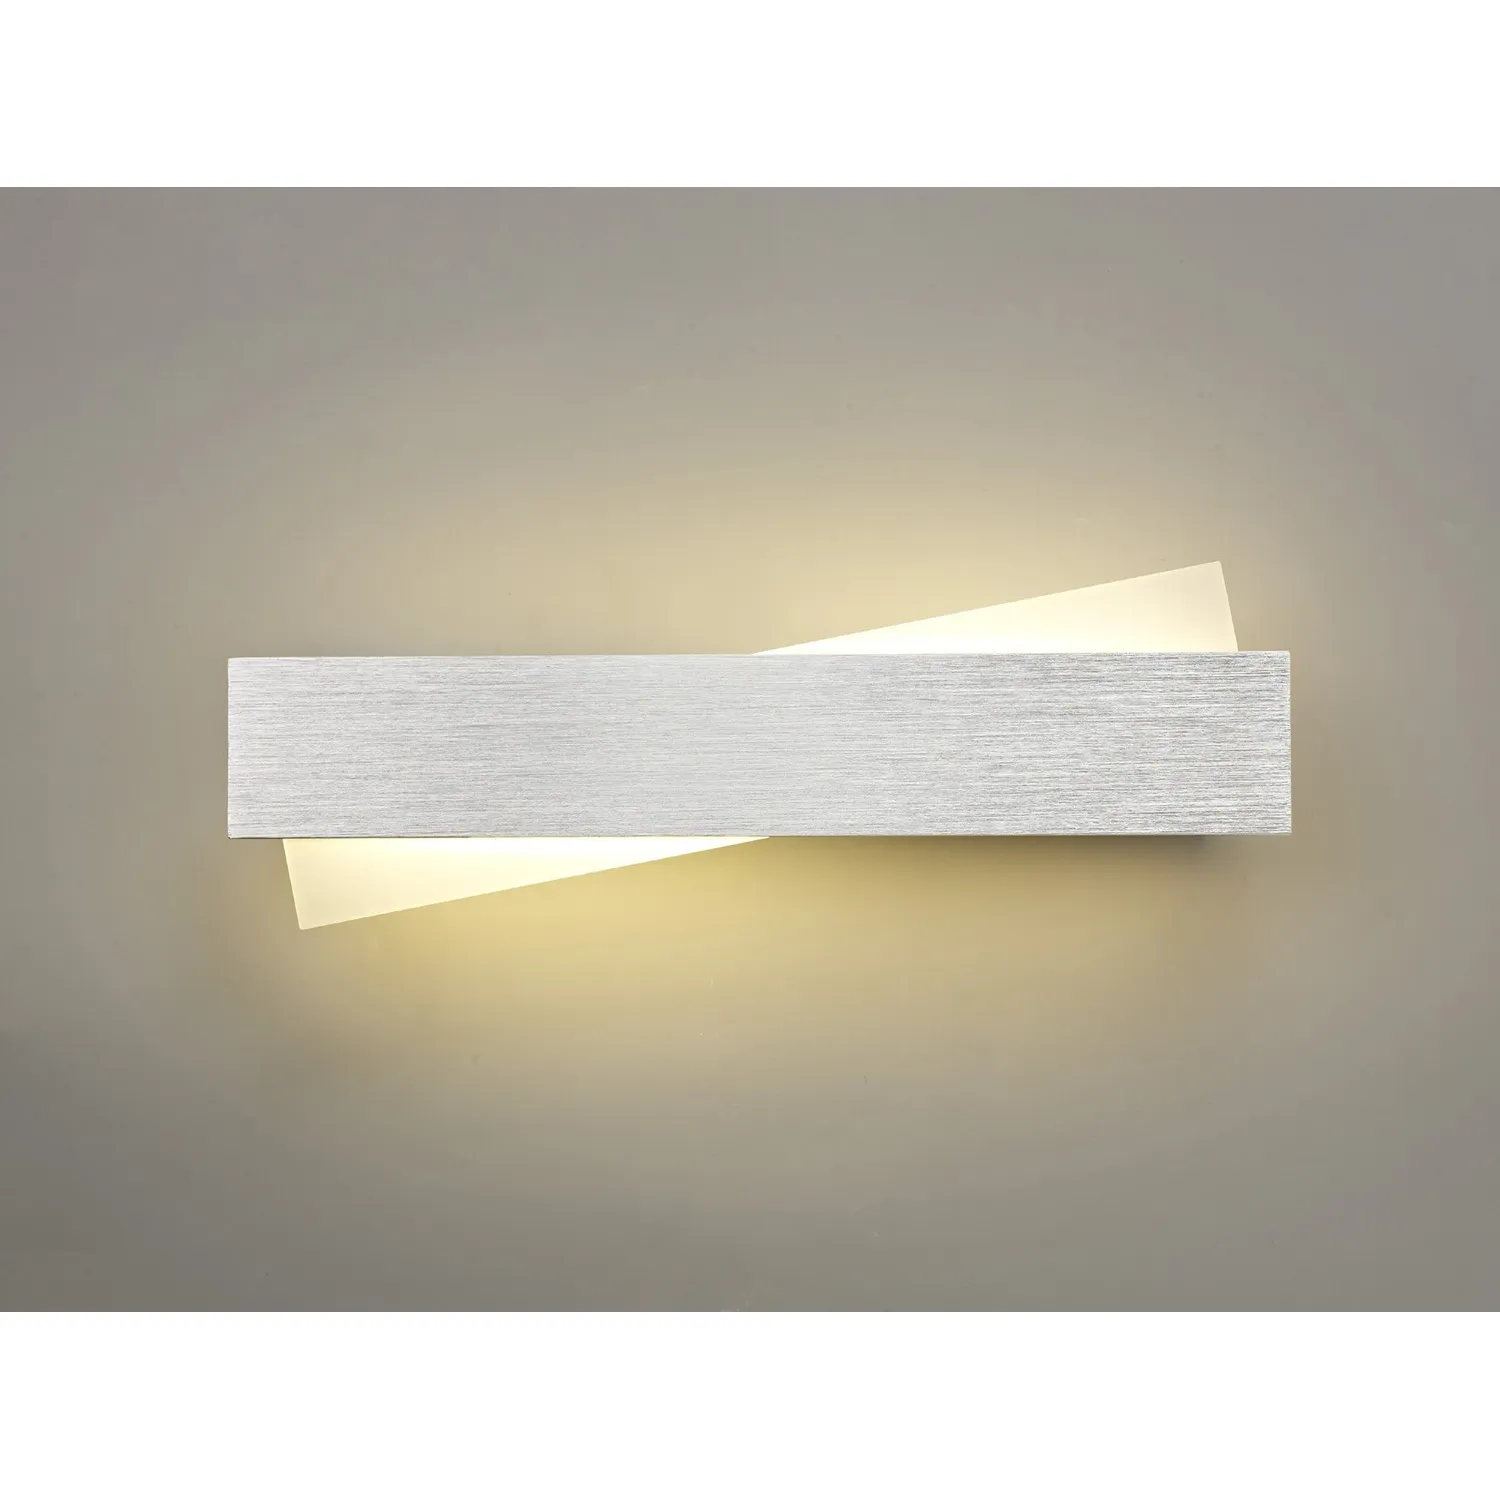 Dartford Wall Lamp, 1 x 8W LED, 3000K, 640lm, Brushed Aluminium Frosted White, 3yrs Warranty